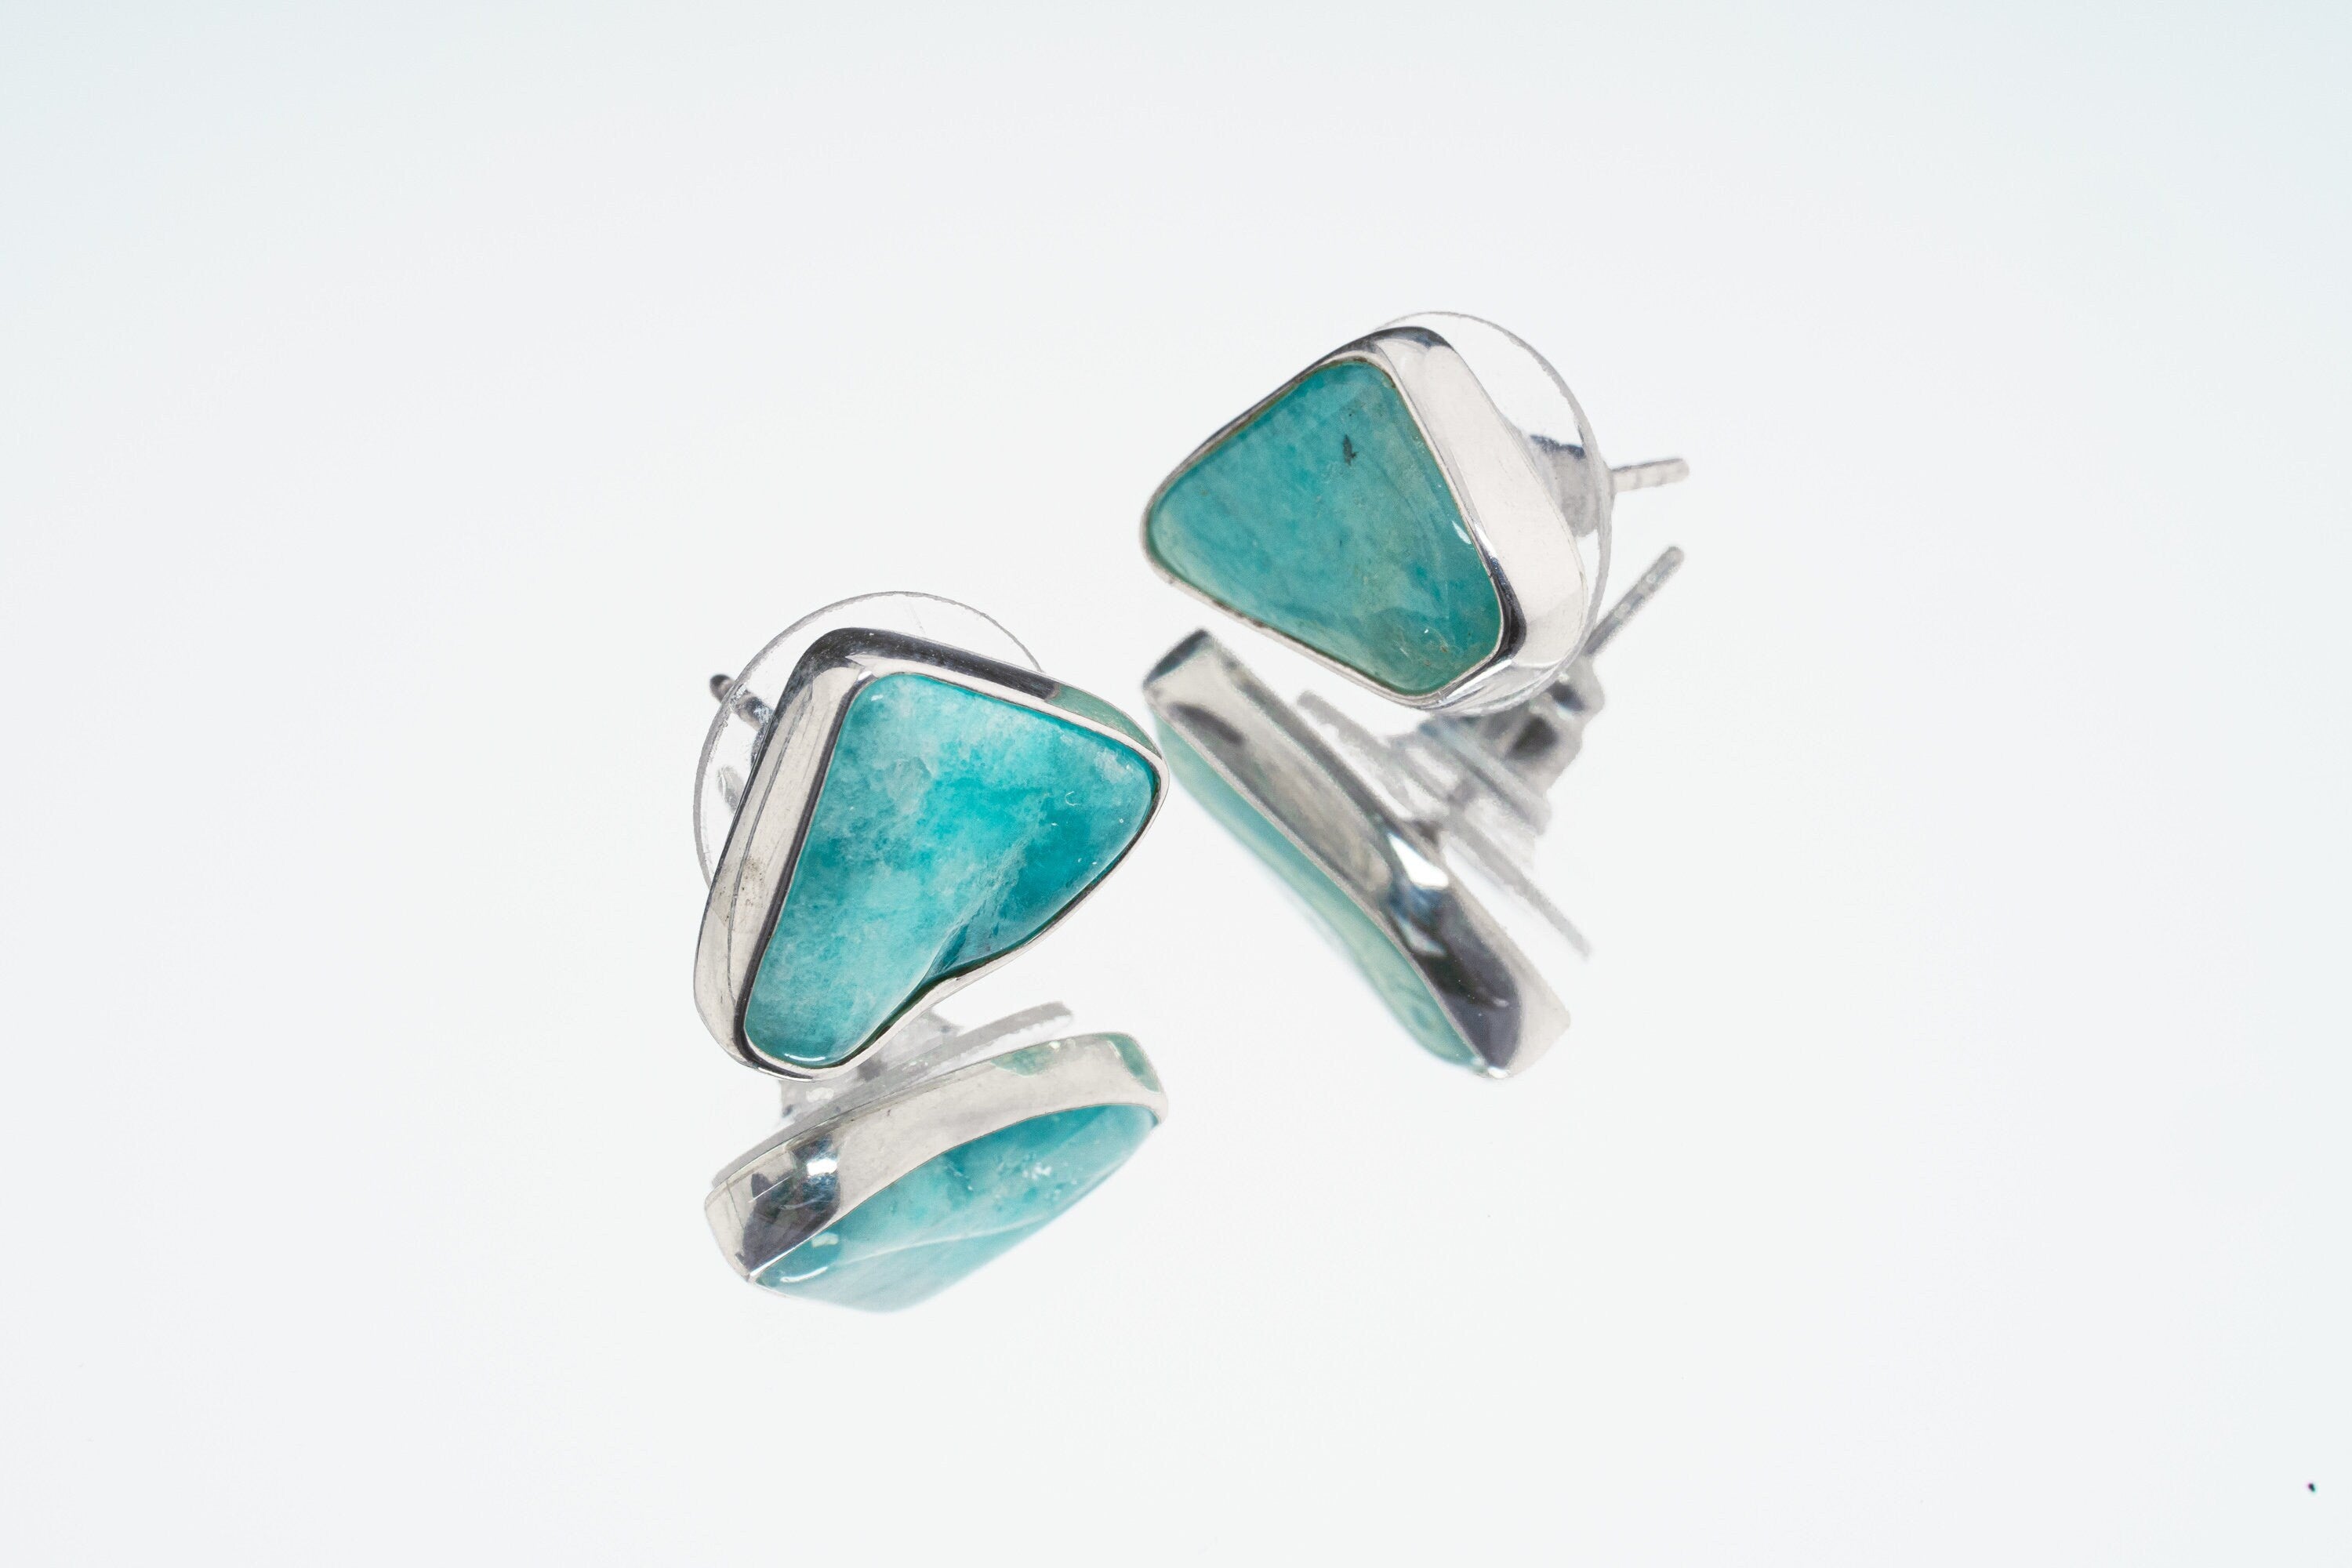 Gem Chrysocolla - Pick a organic shaped Pair- Sterling Silver - Polished Finish - Freeform Earring Studs